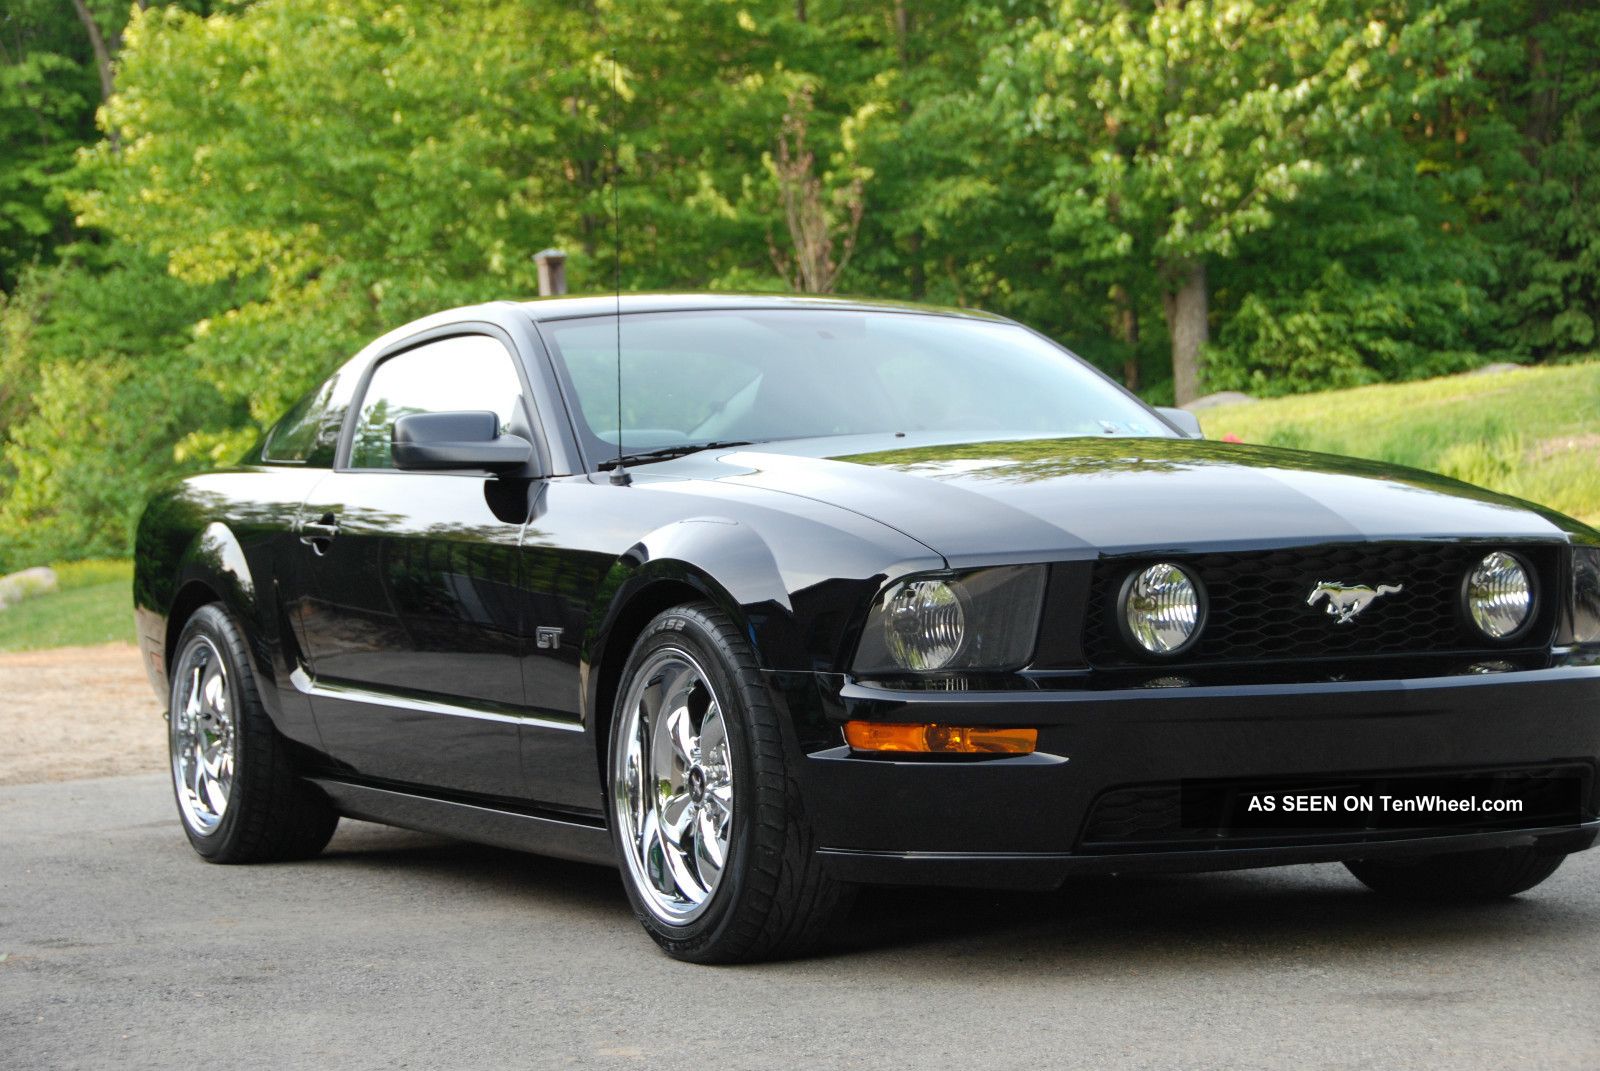 2006 Ford mustang gt user manual #5